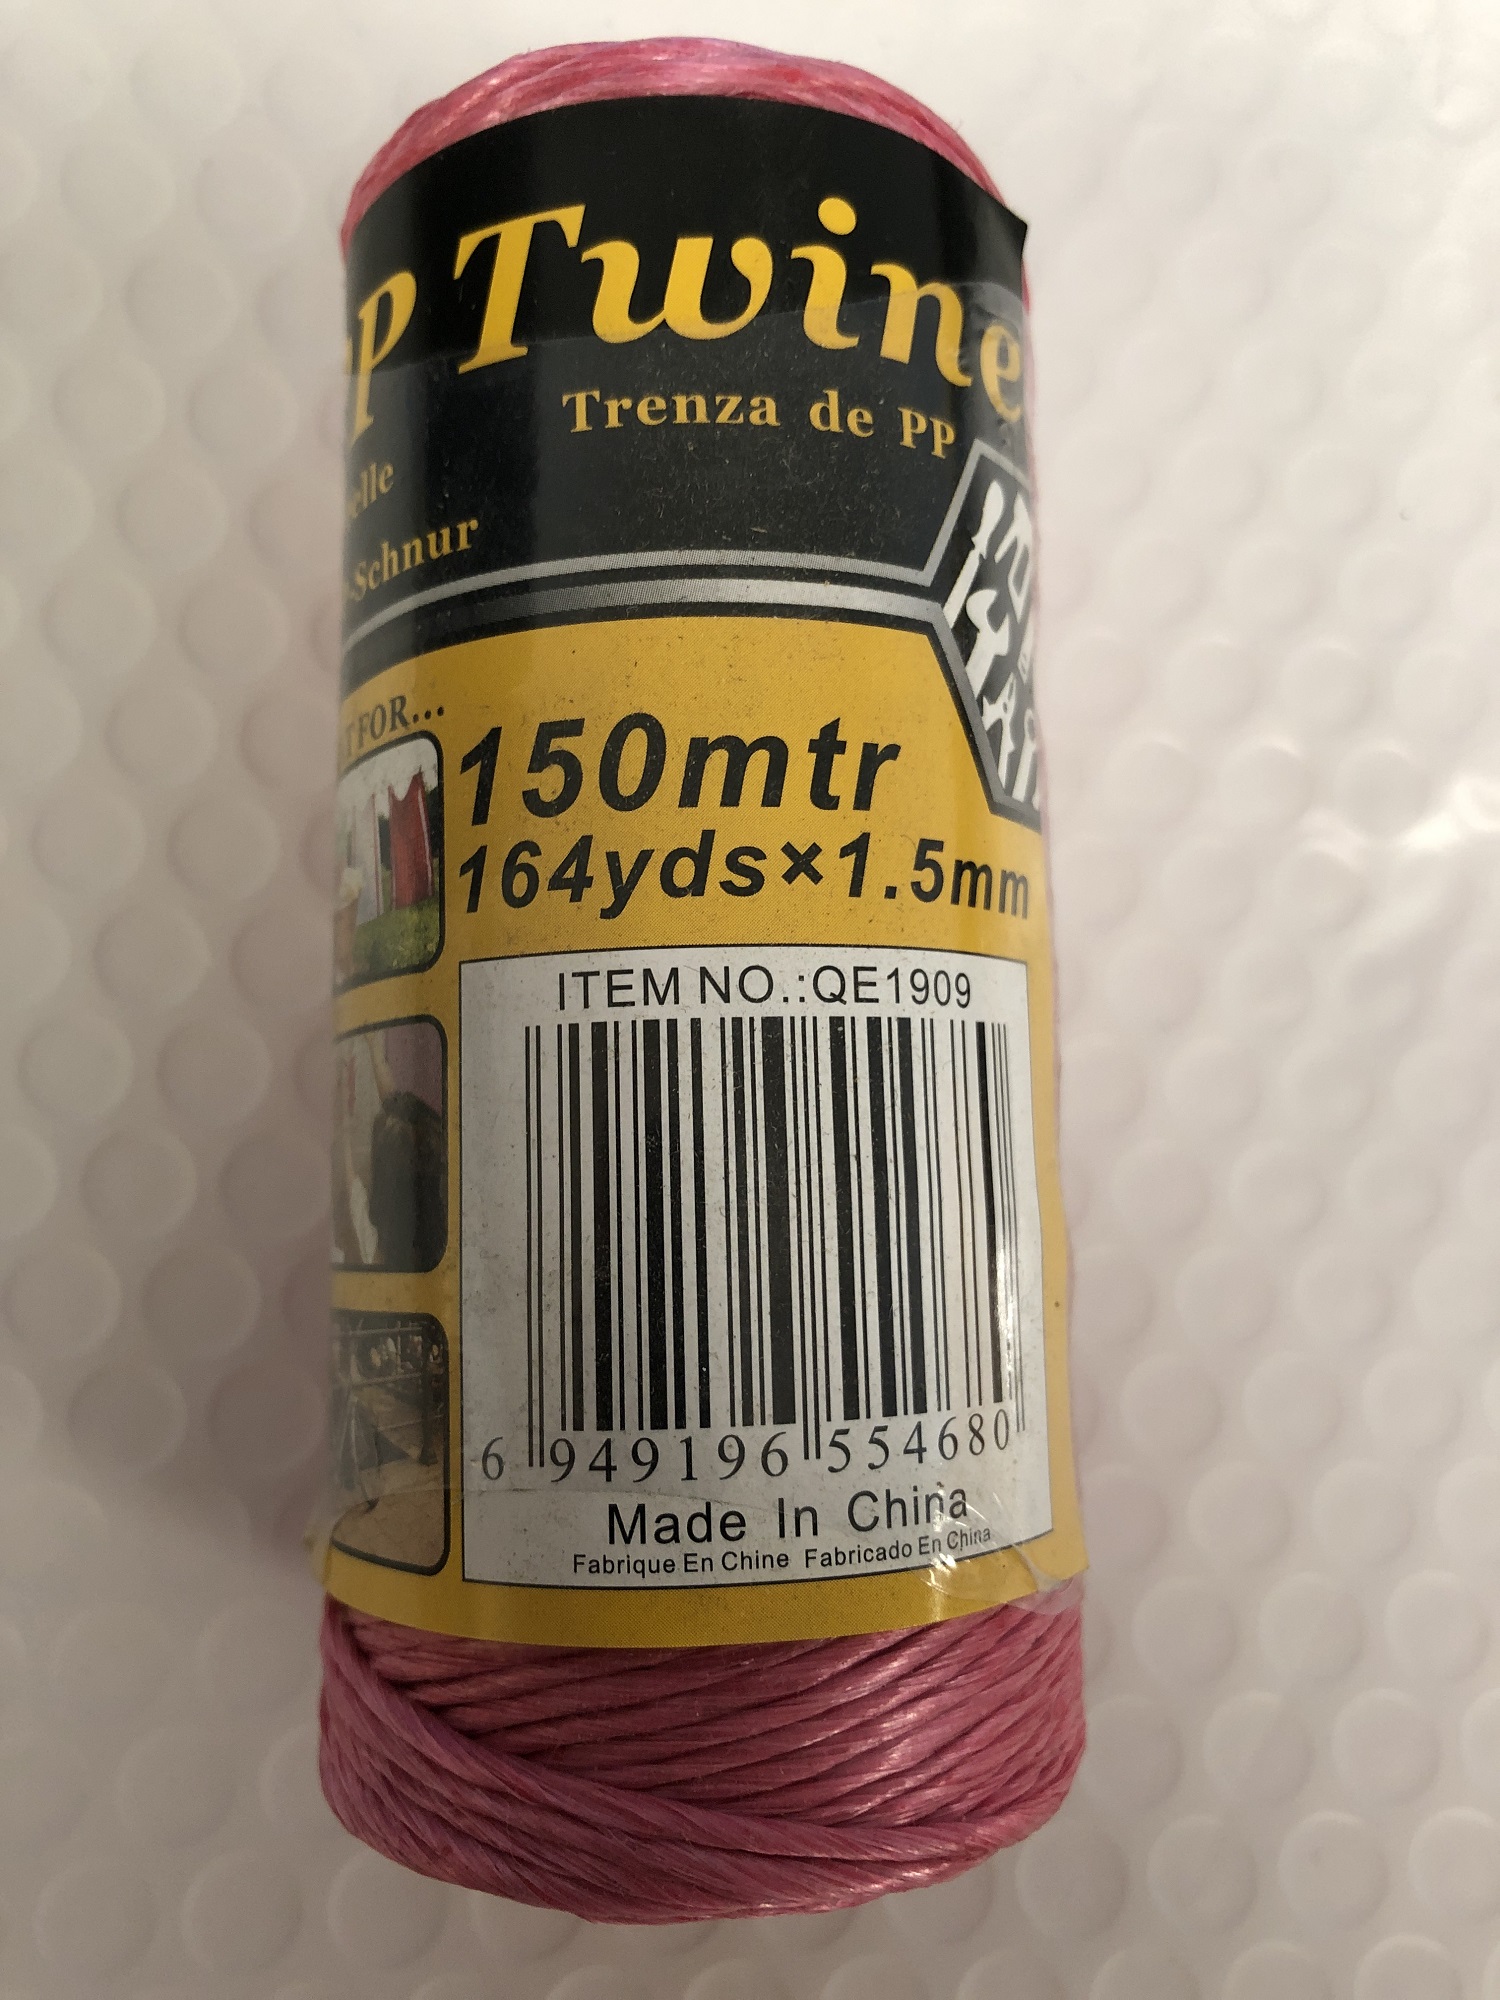 Colored Twine String 164 yds x 1.5 mm